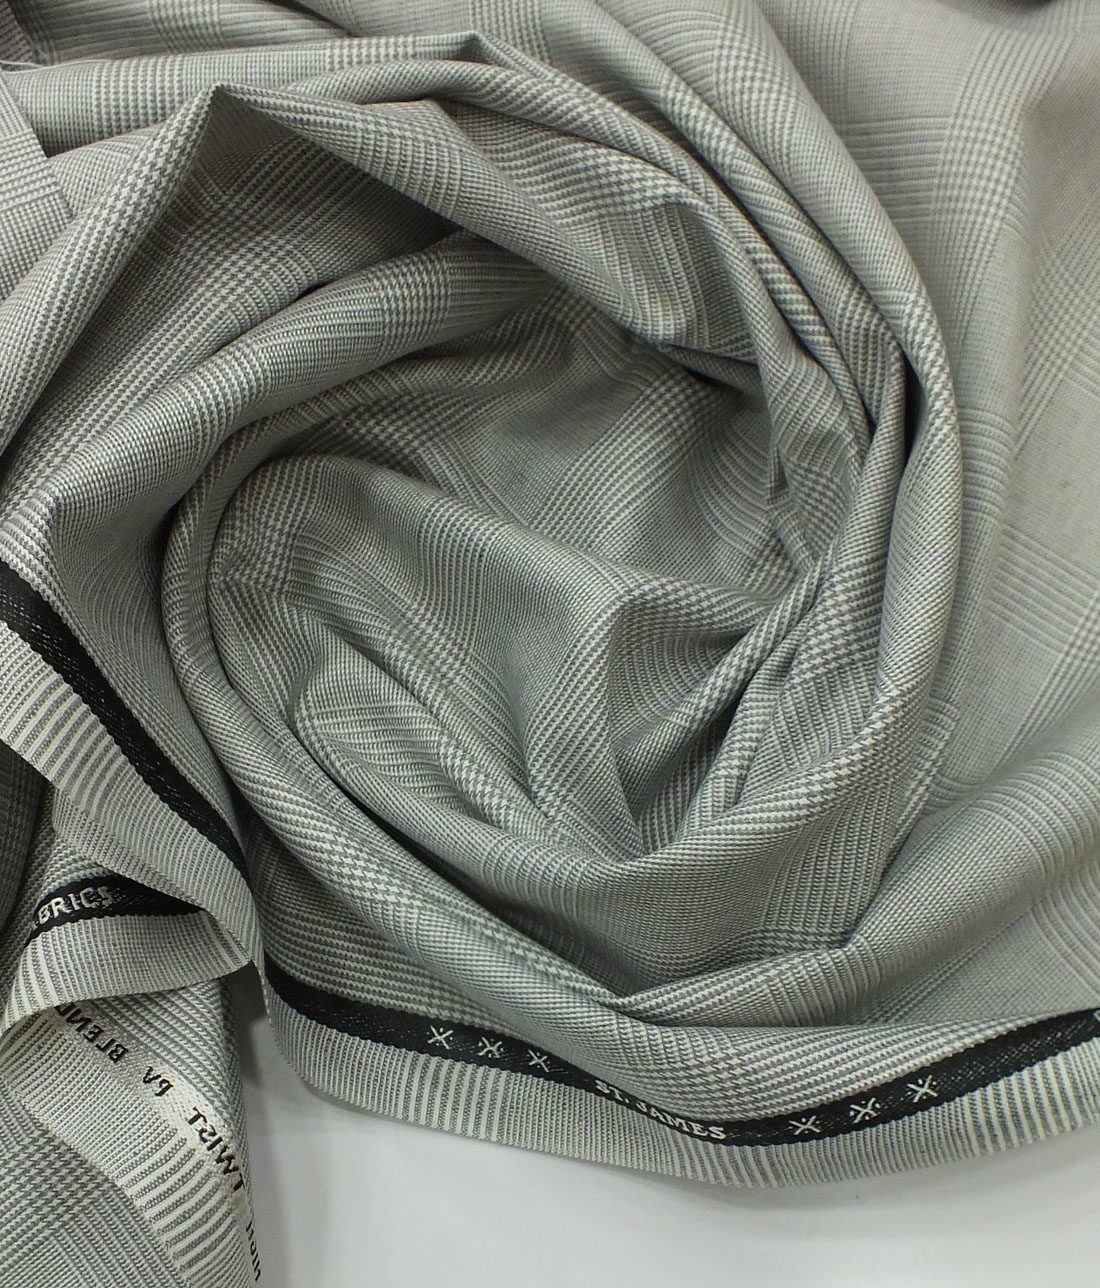 J.Hampstead by Siyaram's Light Grey Broad Self Checks Poly Viscose Trouser or 3 Piece Suit Fabric (Unstitched - 1.25 Mtr)